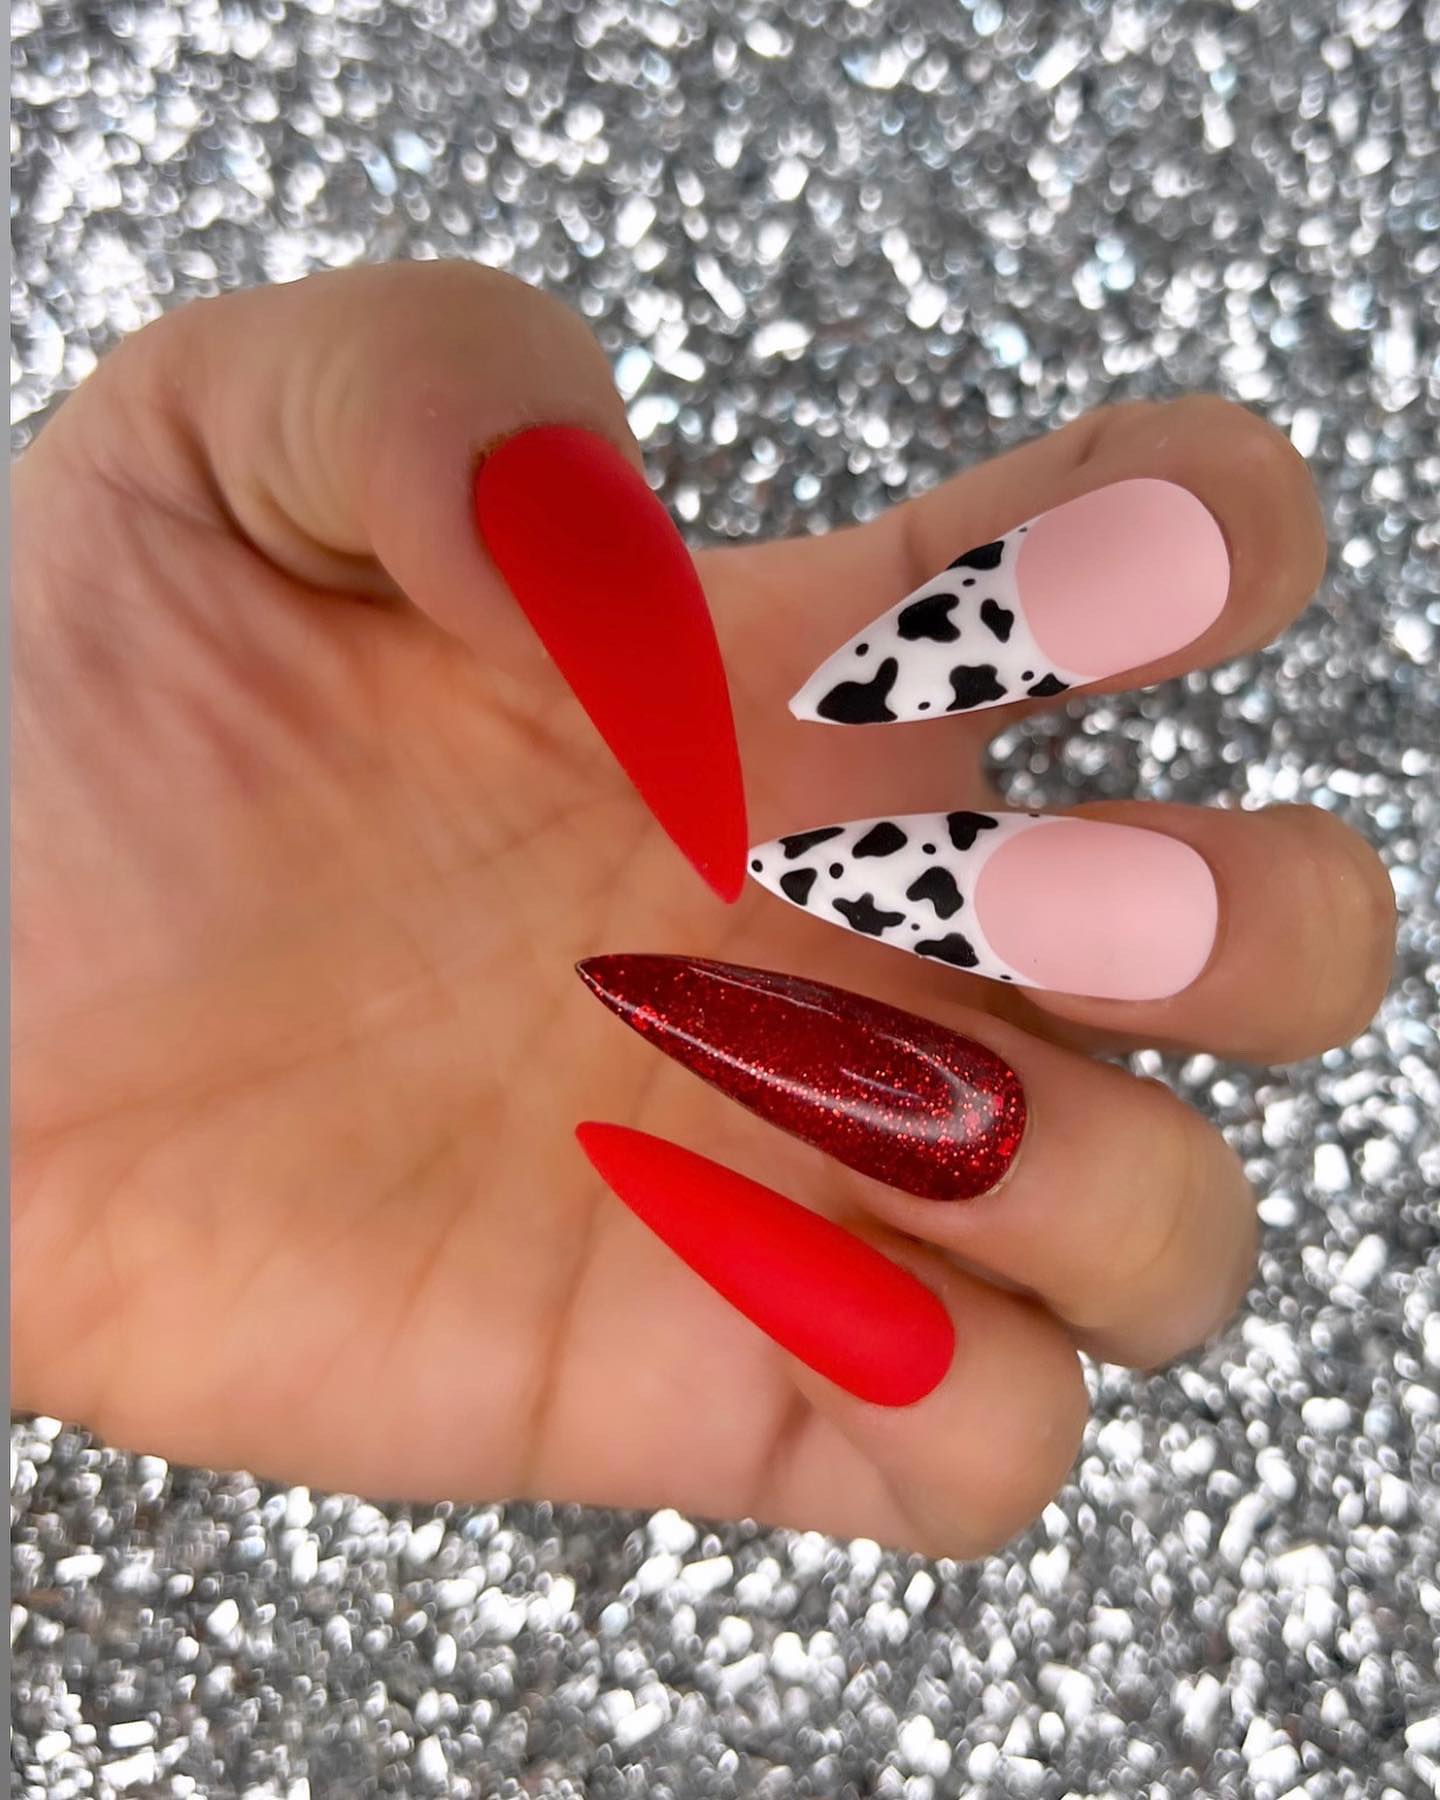 Red matte cow print nails are the perfect way to add a little something extra to your look. It's the perfect combination of fun and classy with glittered red nail polish and French cow print nail art!